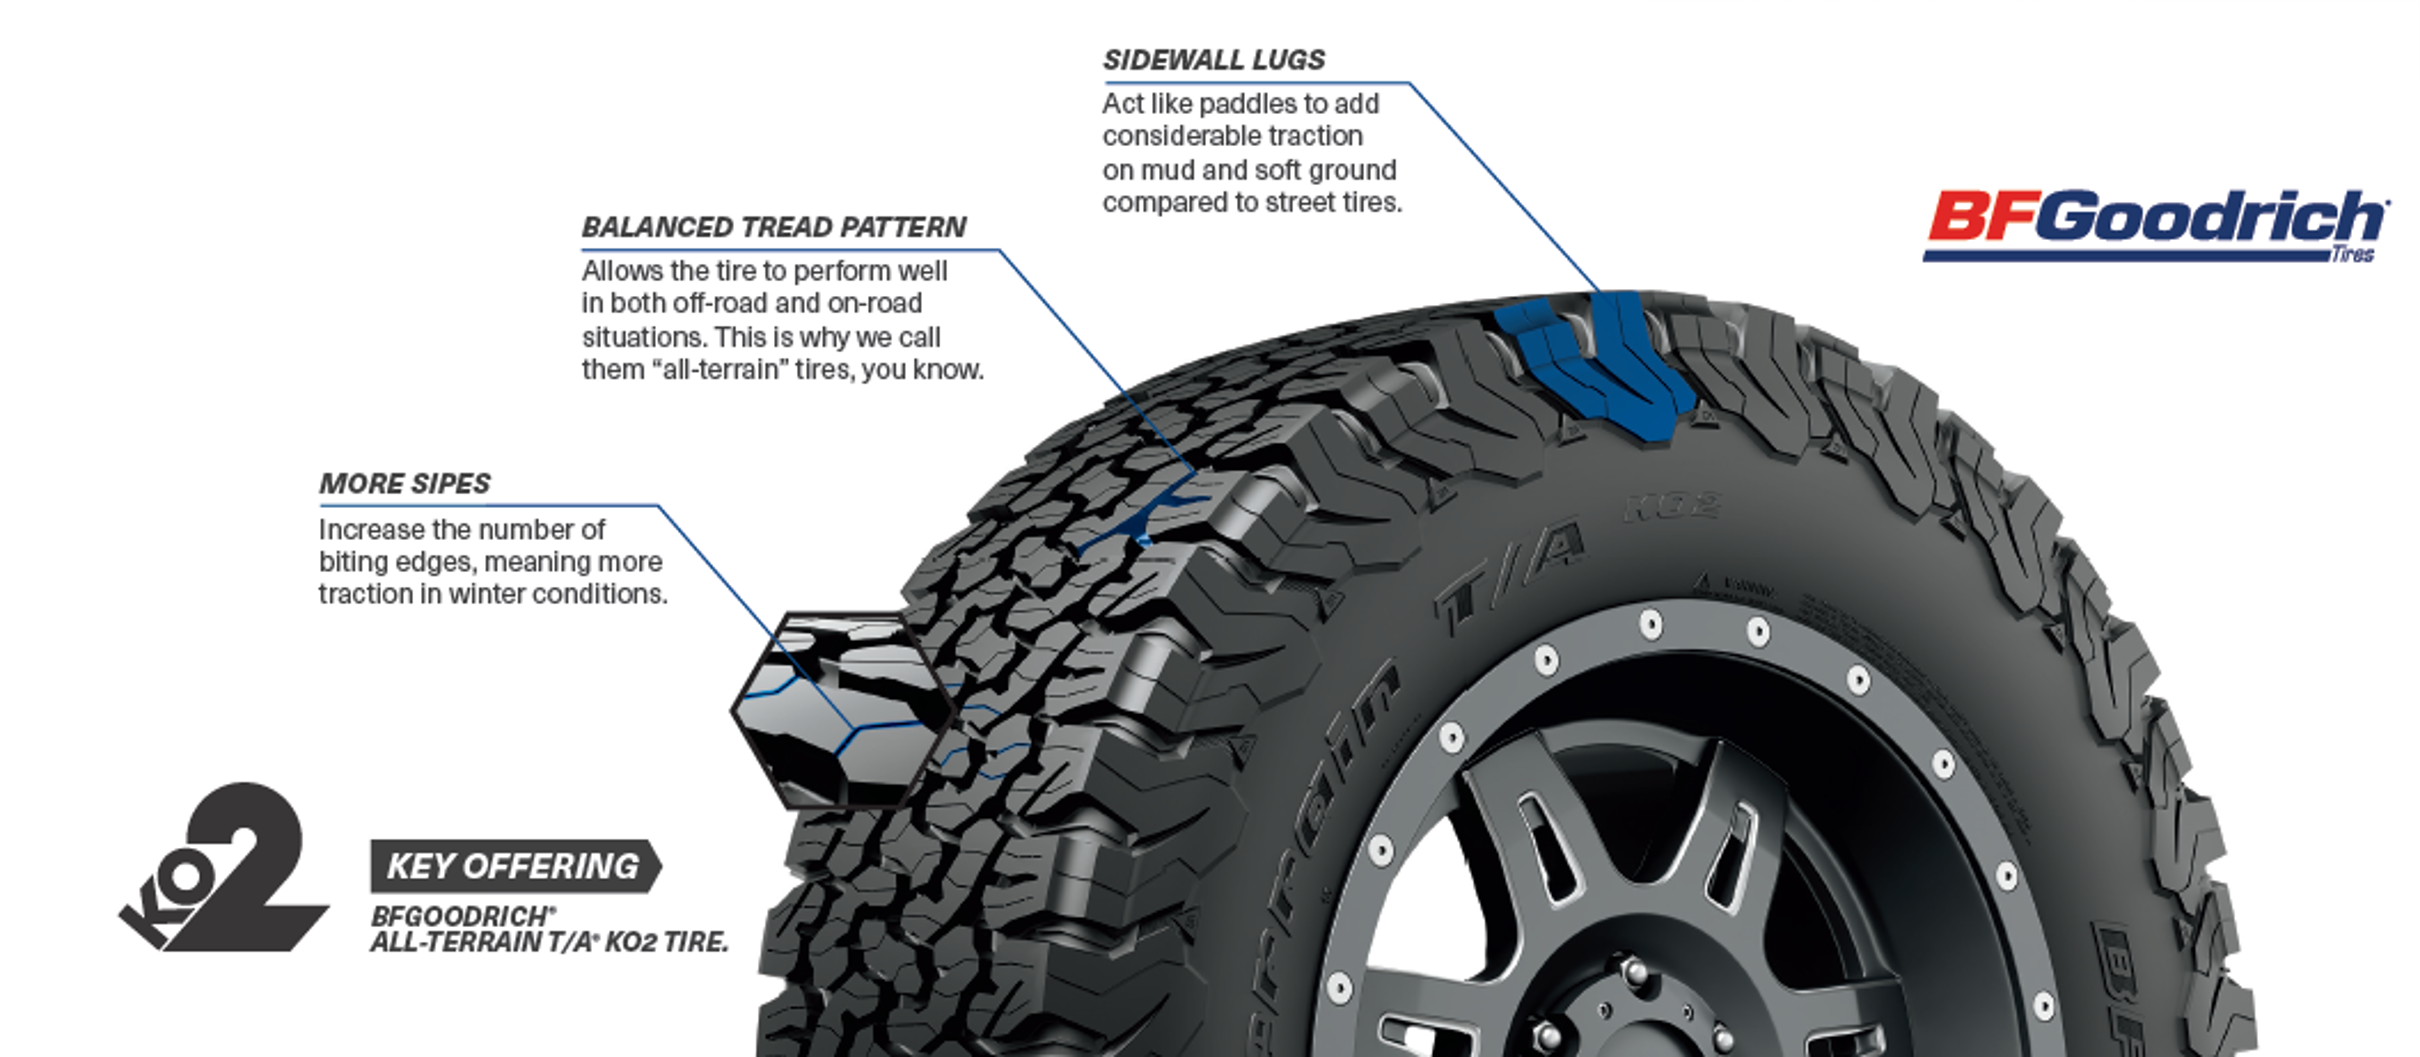 BFGOODRICH ALL-TERRAIN T/A KO2 TIRE More Sipes - Increase the number of biting edges, meaning more traction in winter conditions. Balanced Tread Pattern - Allows the tire to perform well in both off-road and on-road situations. This is why we call them “all-terrain” tires! Sidewall Lugs - Act like paddles to add considerable traction on mud and soft ground compared to street tires.